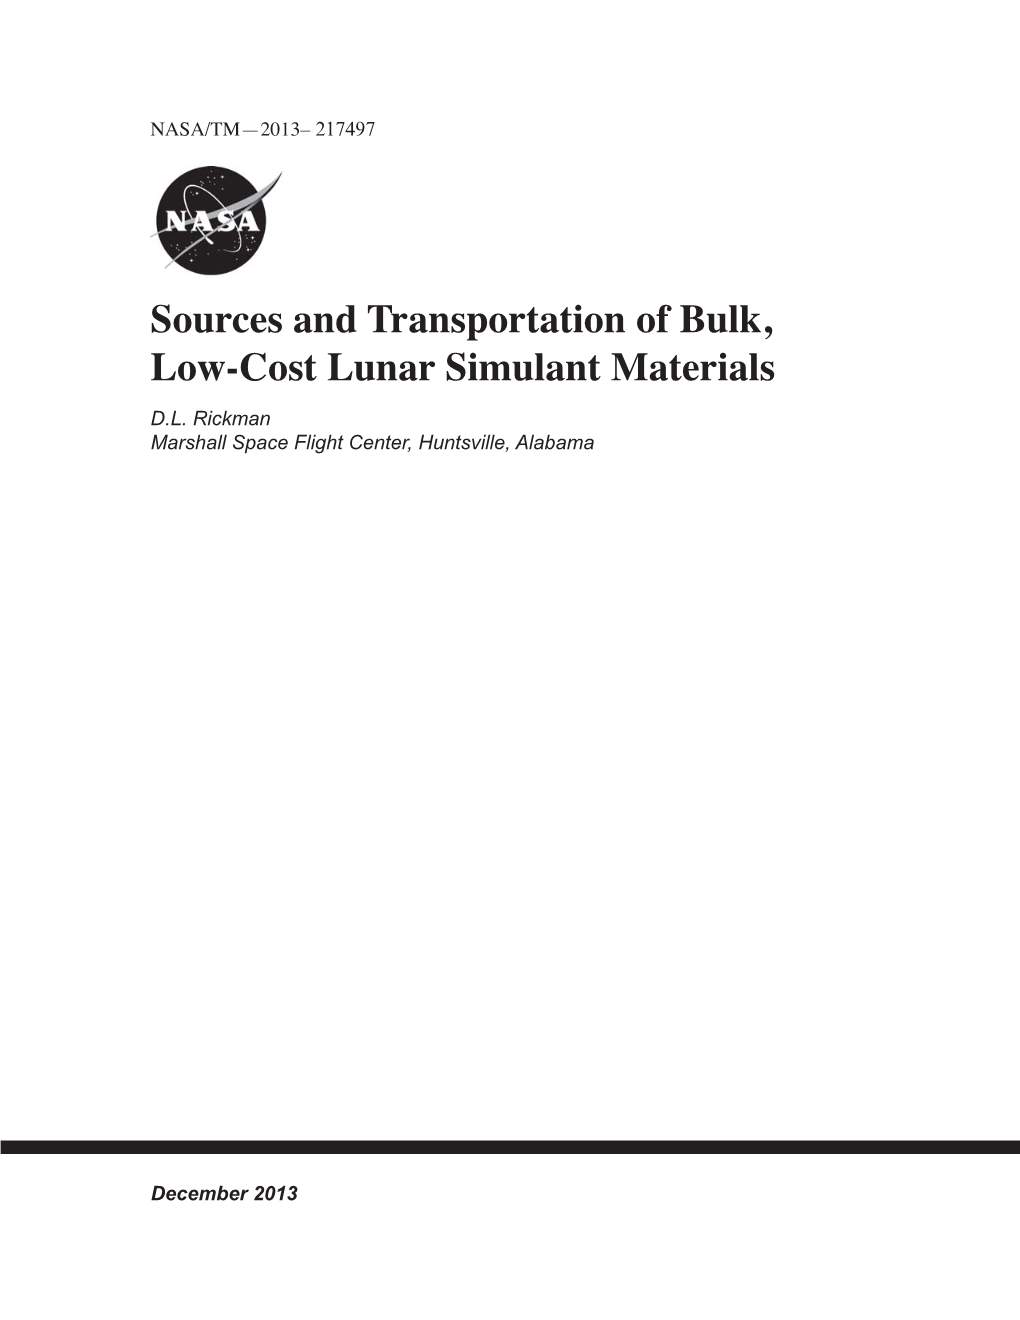 Sources and Transportation of Bulk, Low-Cost Lunar Simulant Materials